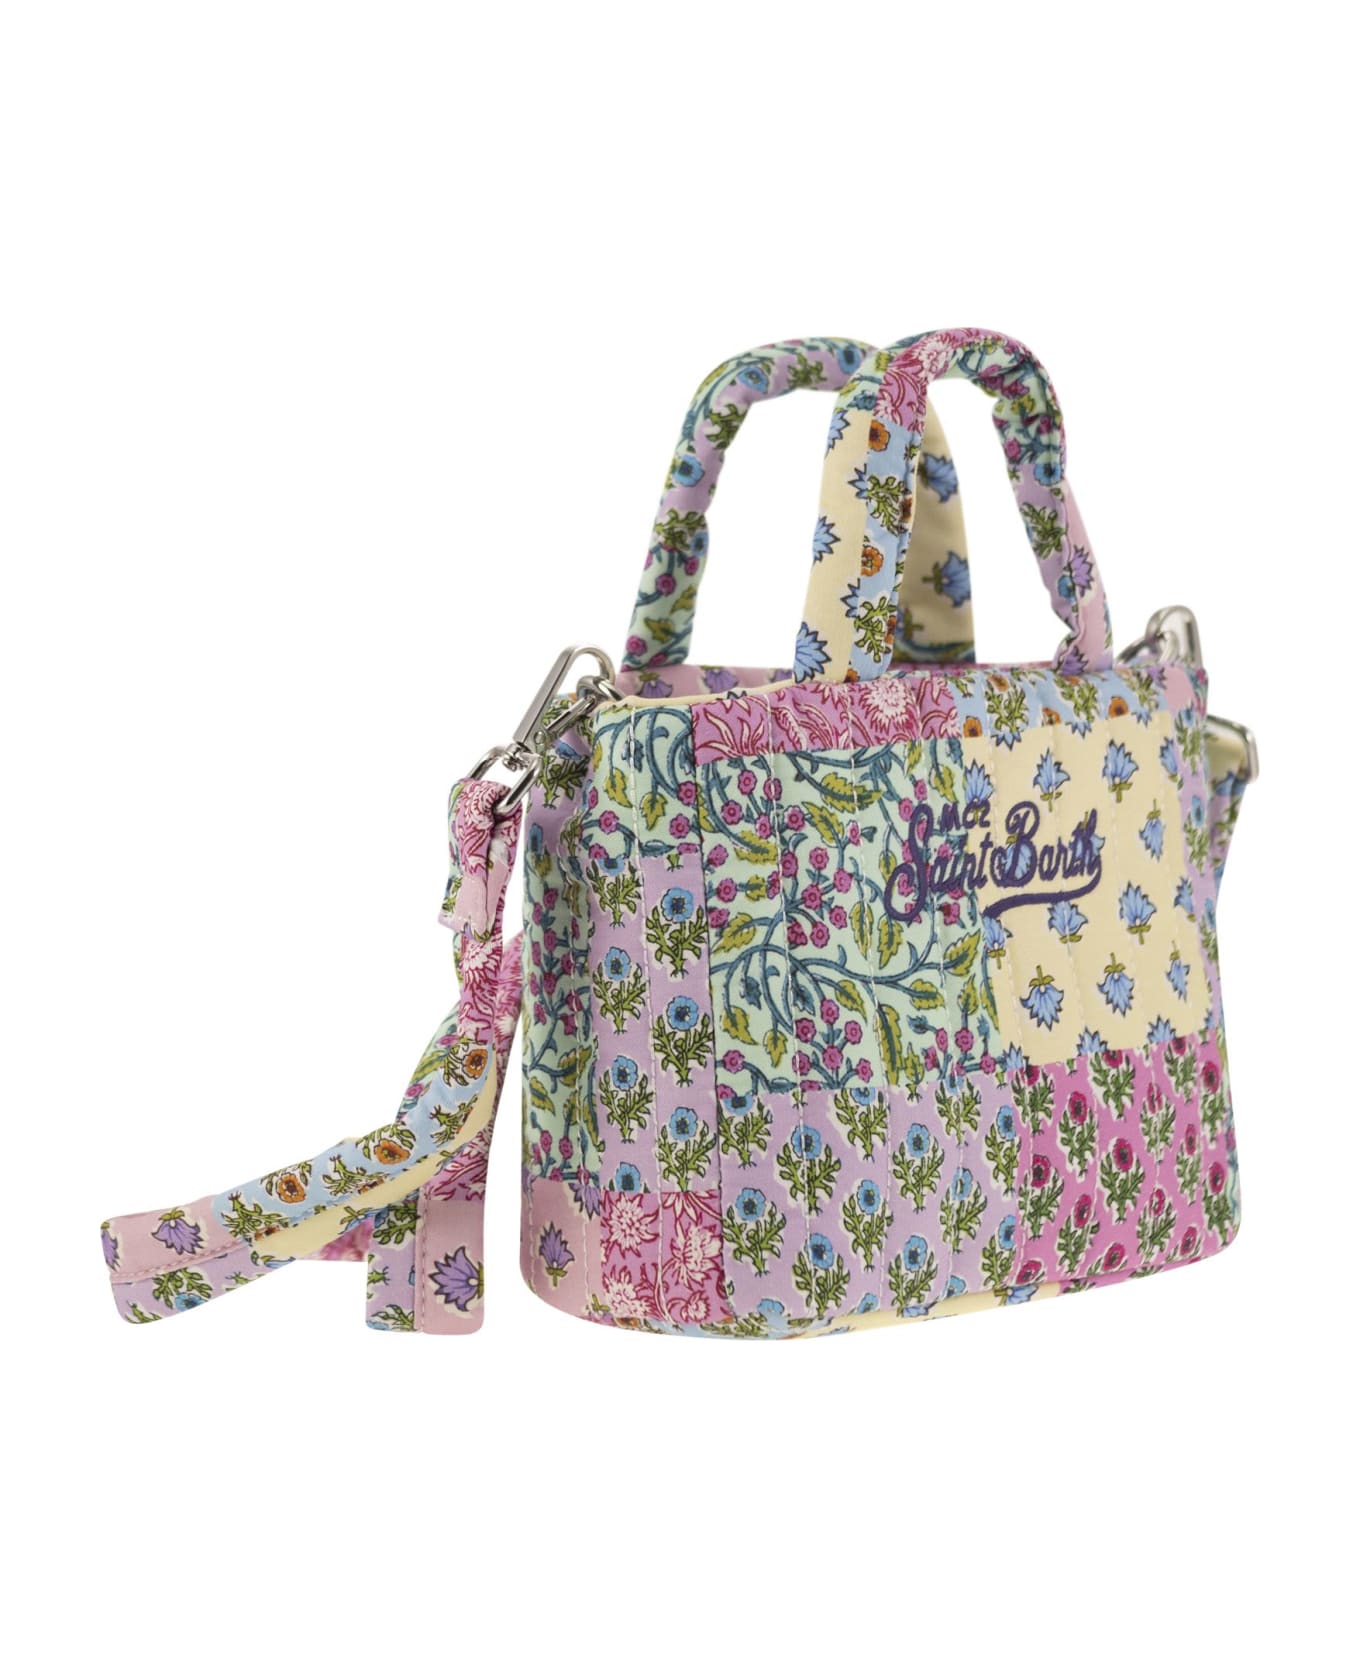 MC2 Saint Barth Soft Tote Mini Quilted Bag With Flowers - Multicolor